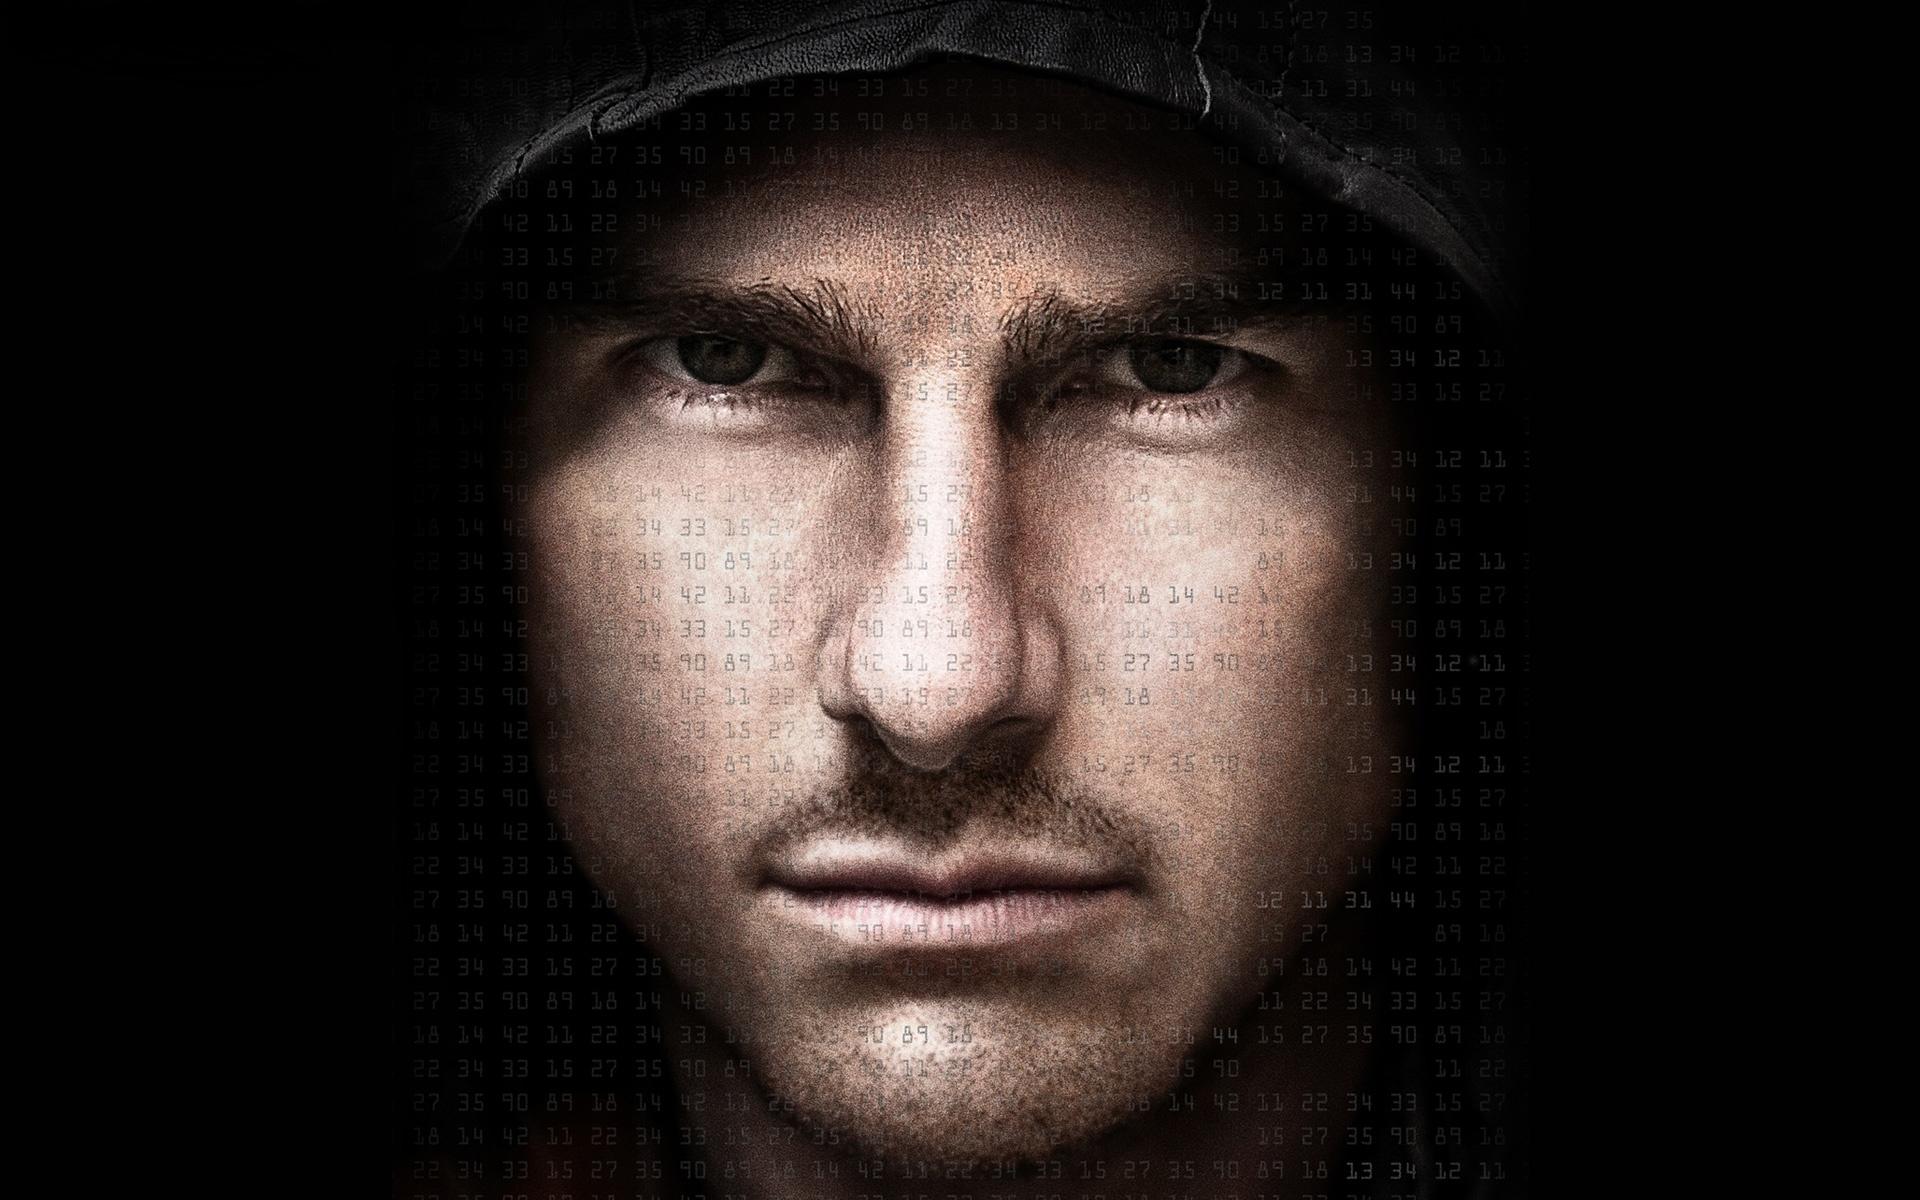 Mission: Impossible 5 News